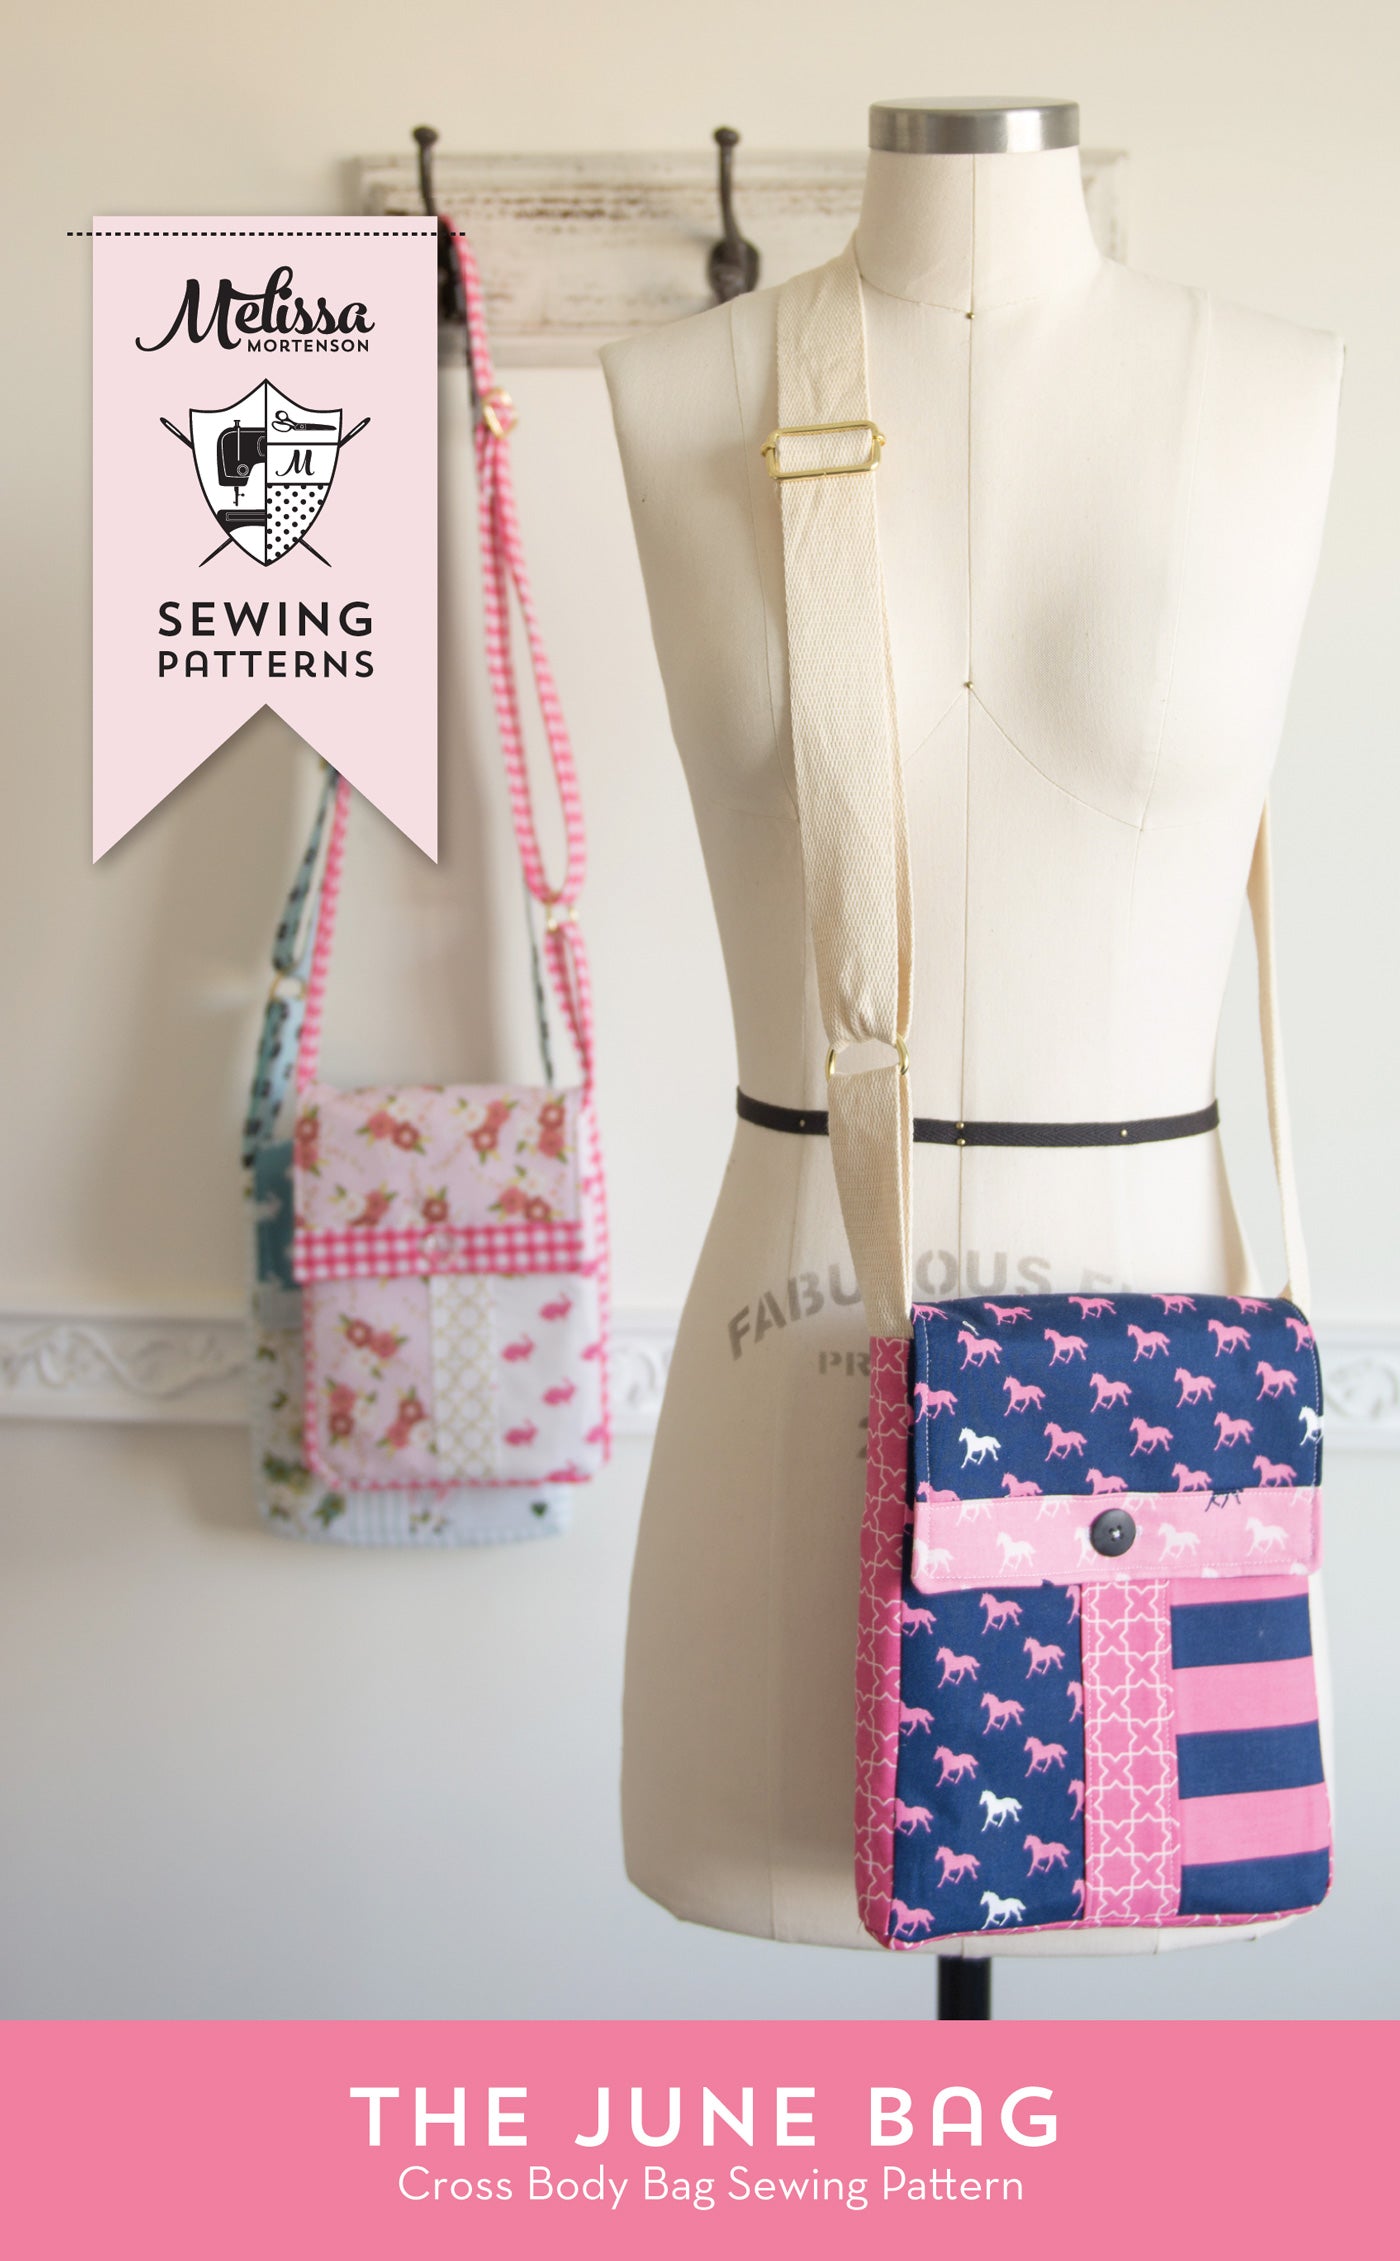 Blog - Introducing The Crossbody Bag Sewing Patterns by Mrs H